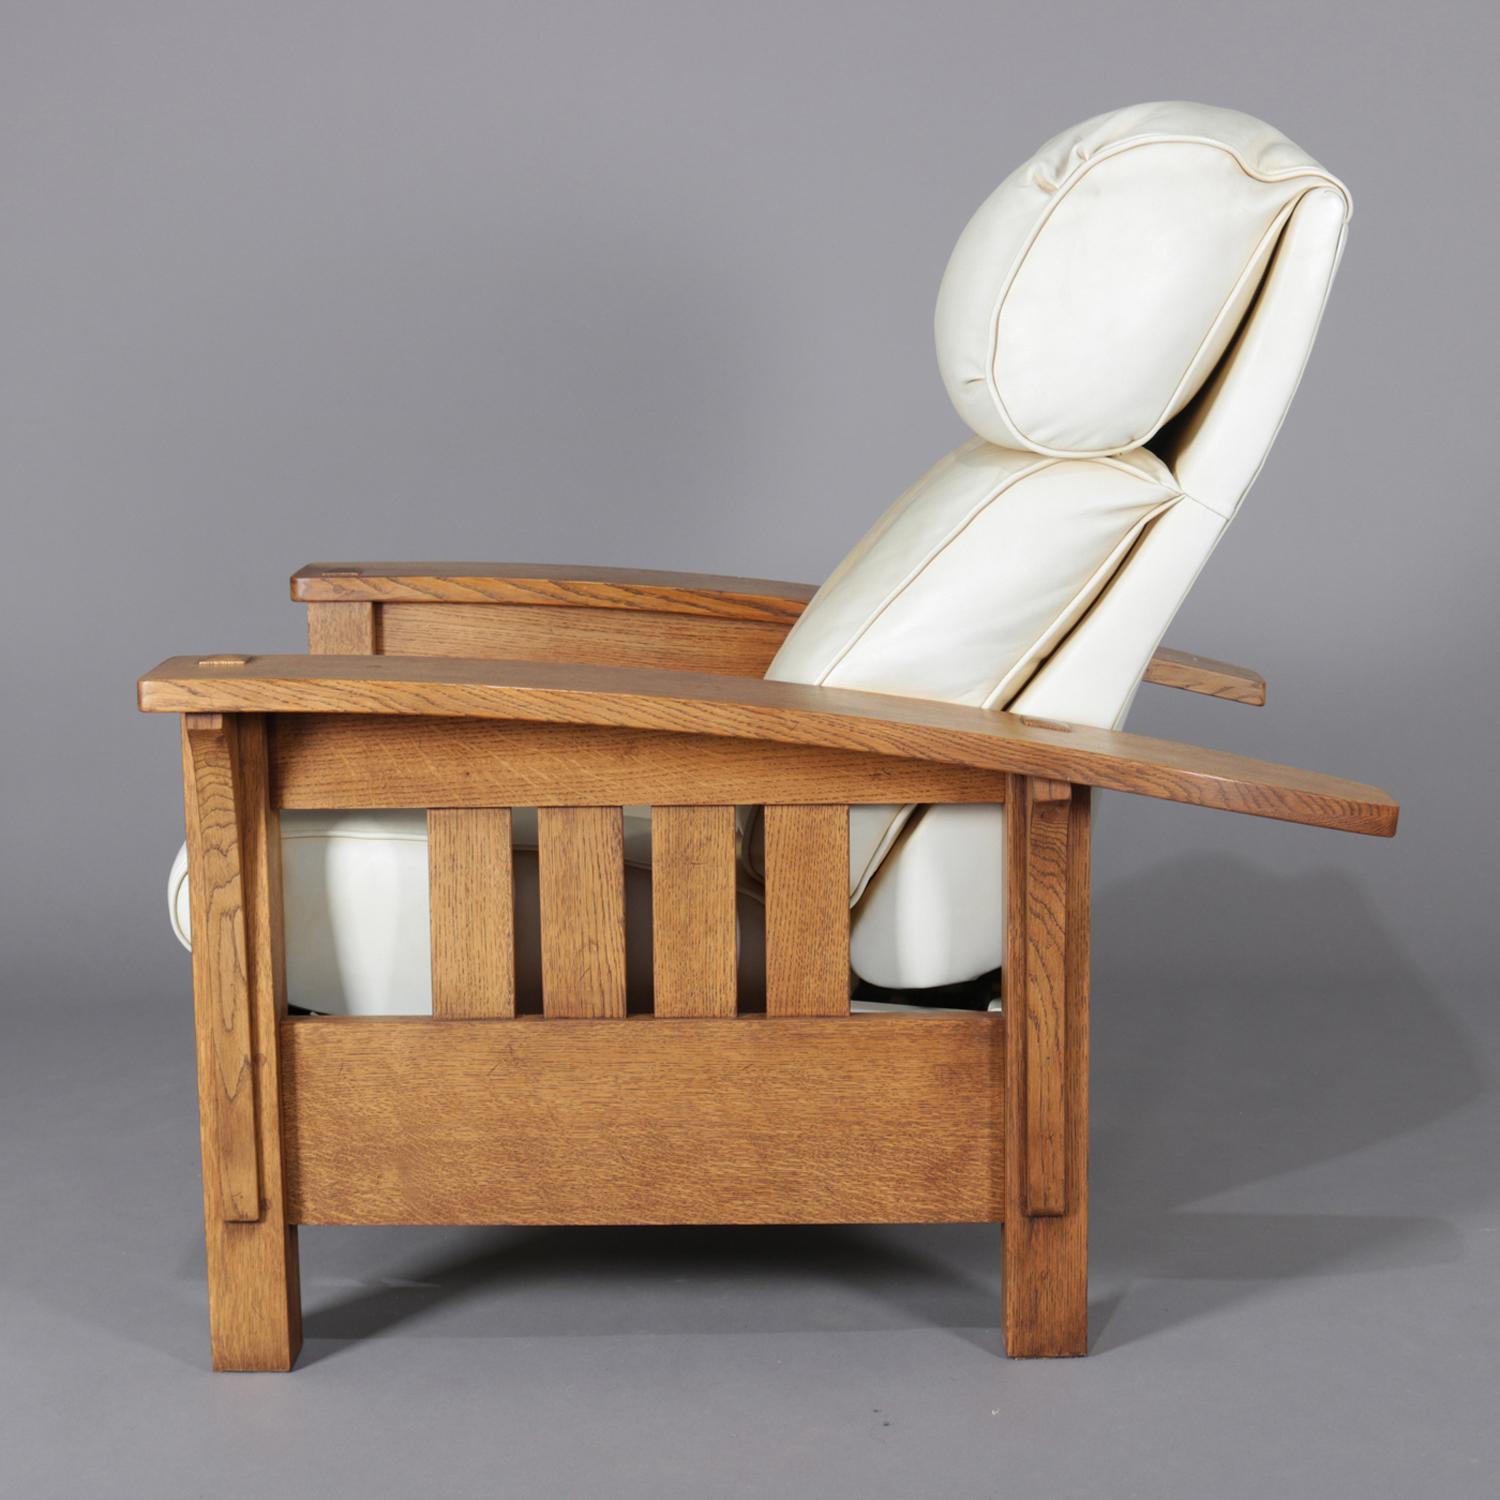 Rare form Arts & Crafts Stickley Bros. Morris chair features oak frame with bow arms over slat form sides reclining to include footrest, overstuffed and leather upholstered, brand and label on inner back leg, circa 1980.

Measures: 37.5